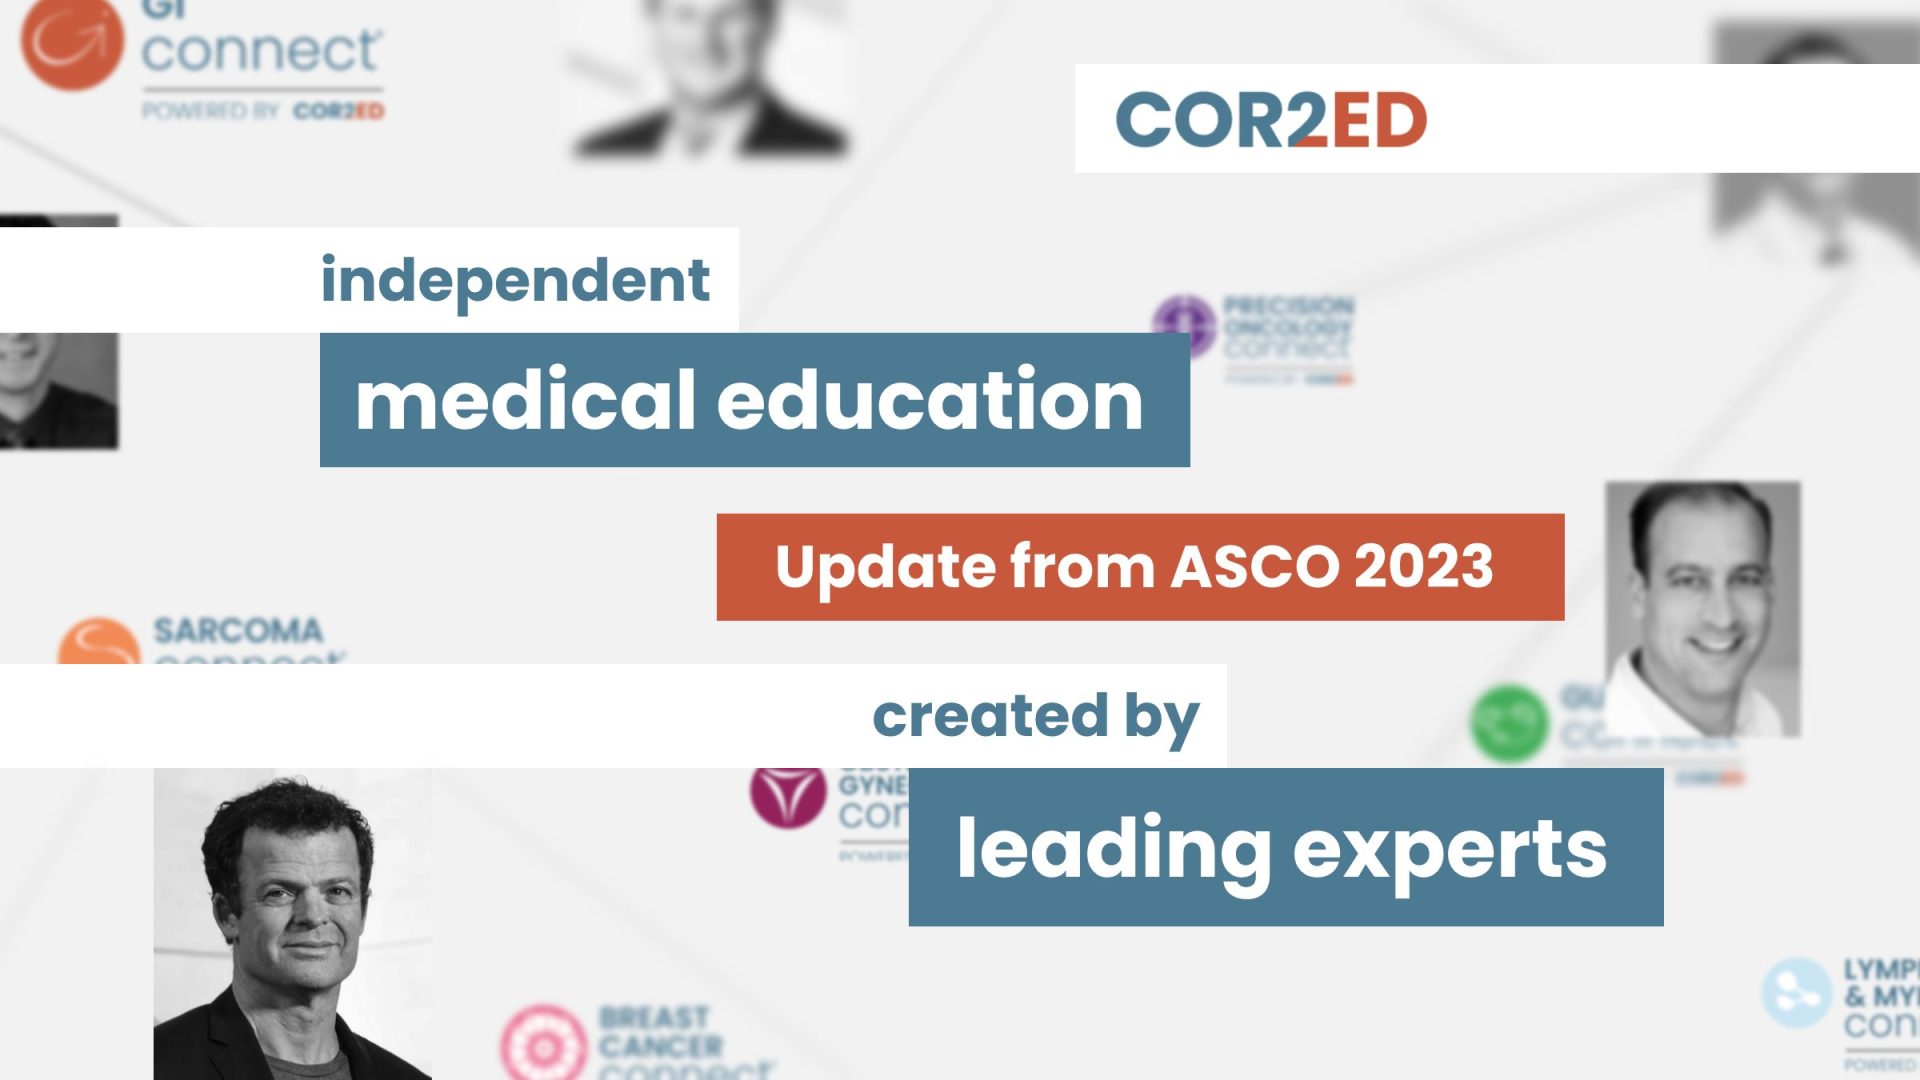 Listen to Expert Insights on Late-Breaking Data from ASCO 2023